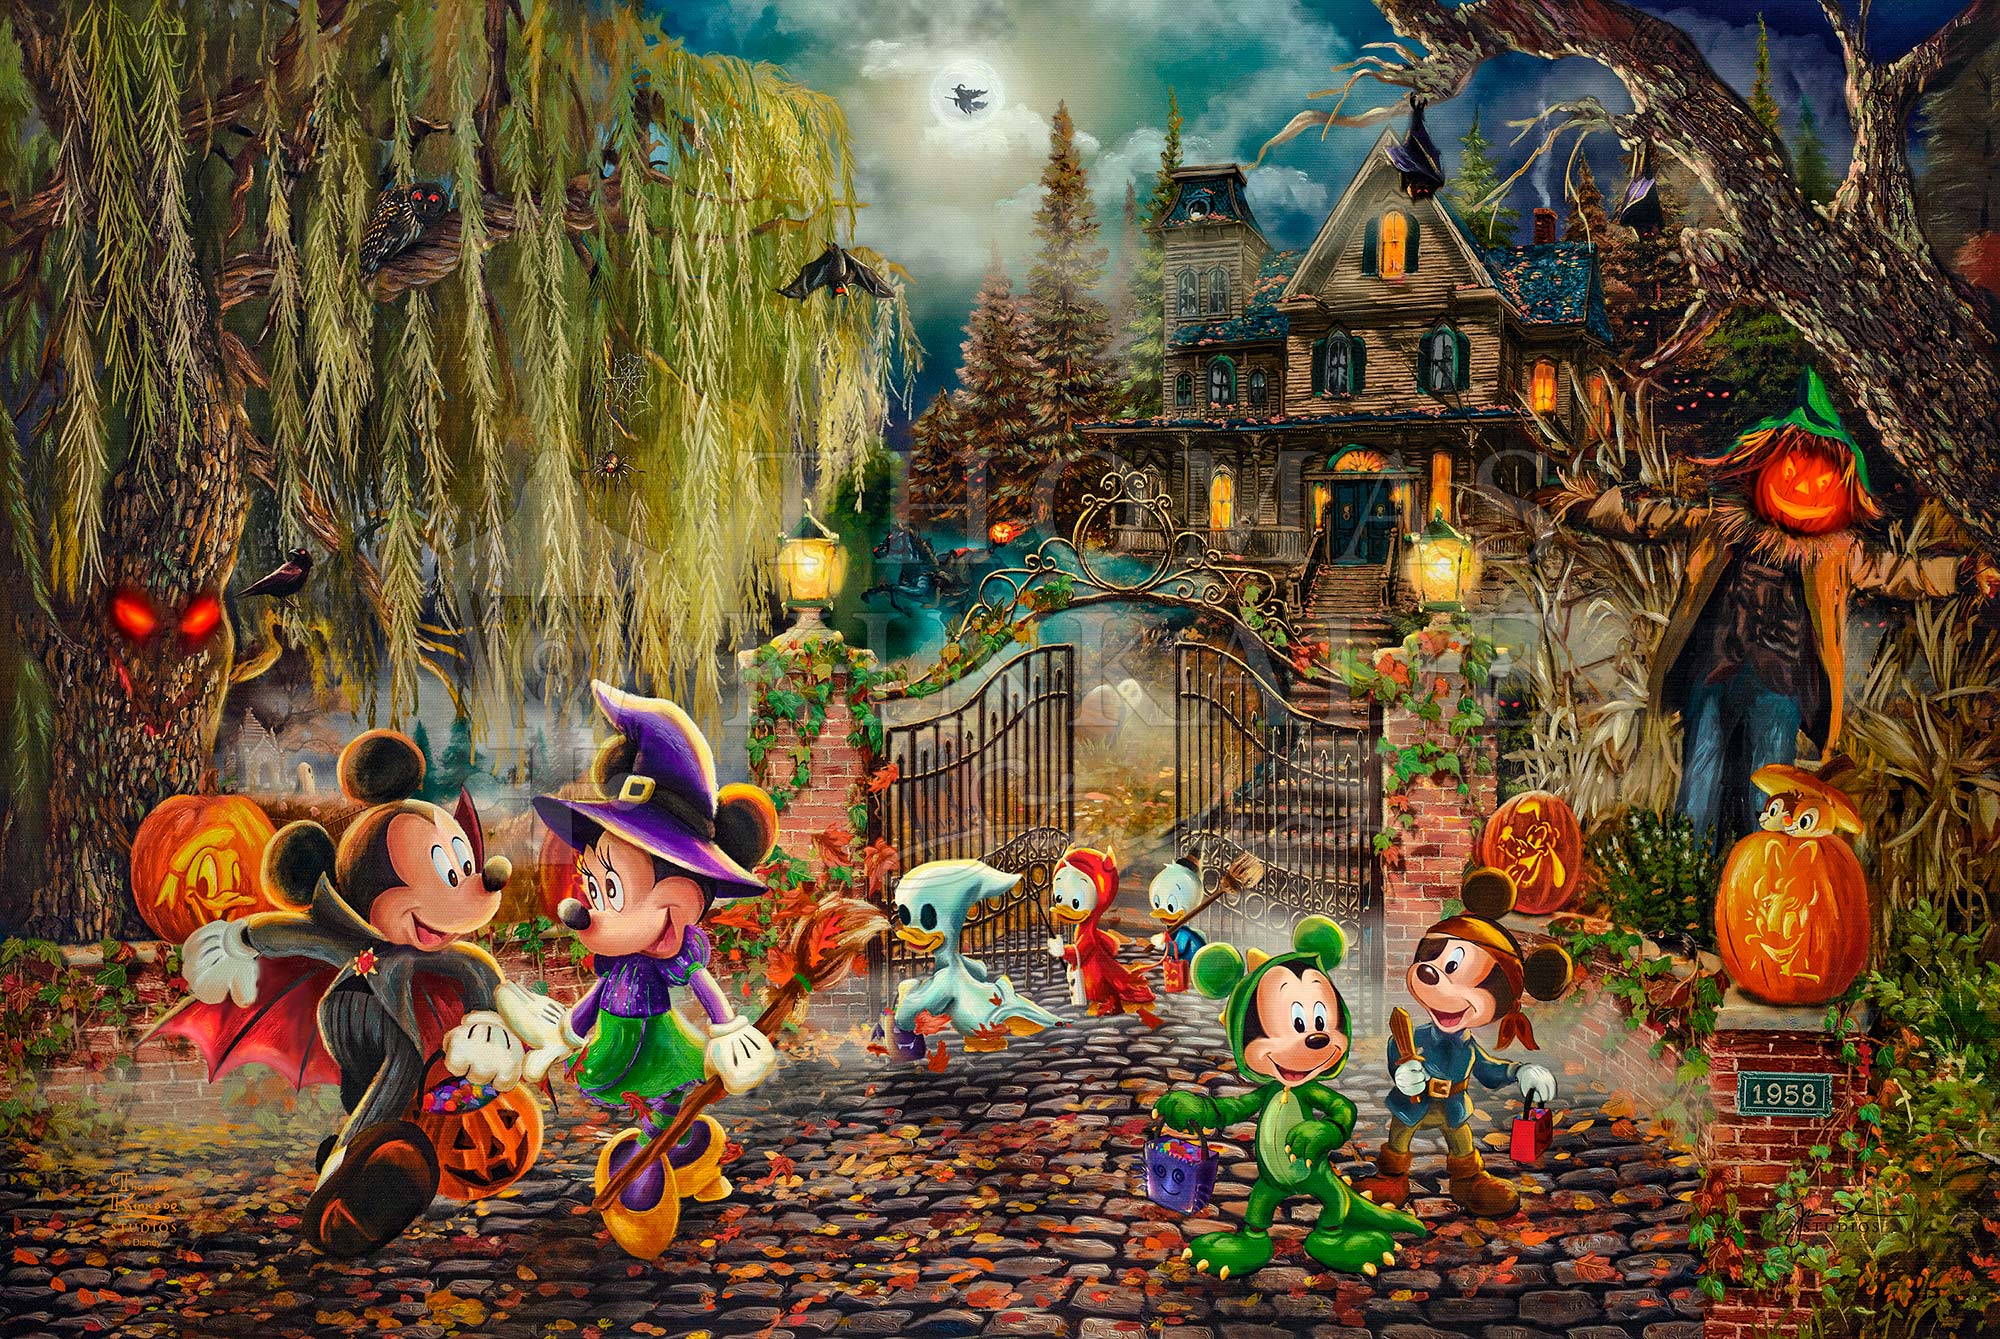 Mickey is dressed up as a Vampire and Minnie as a Witch. Unframed